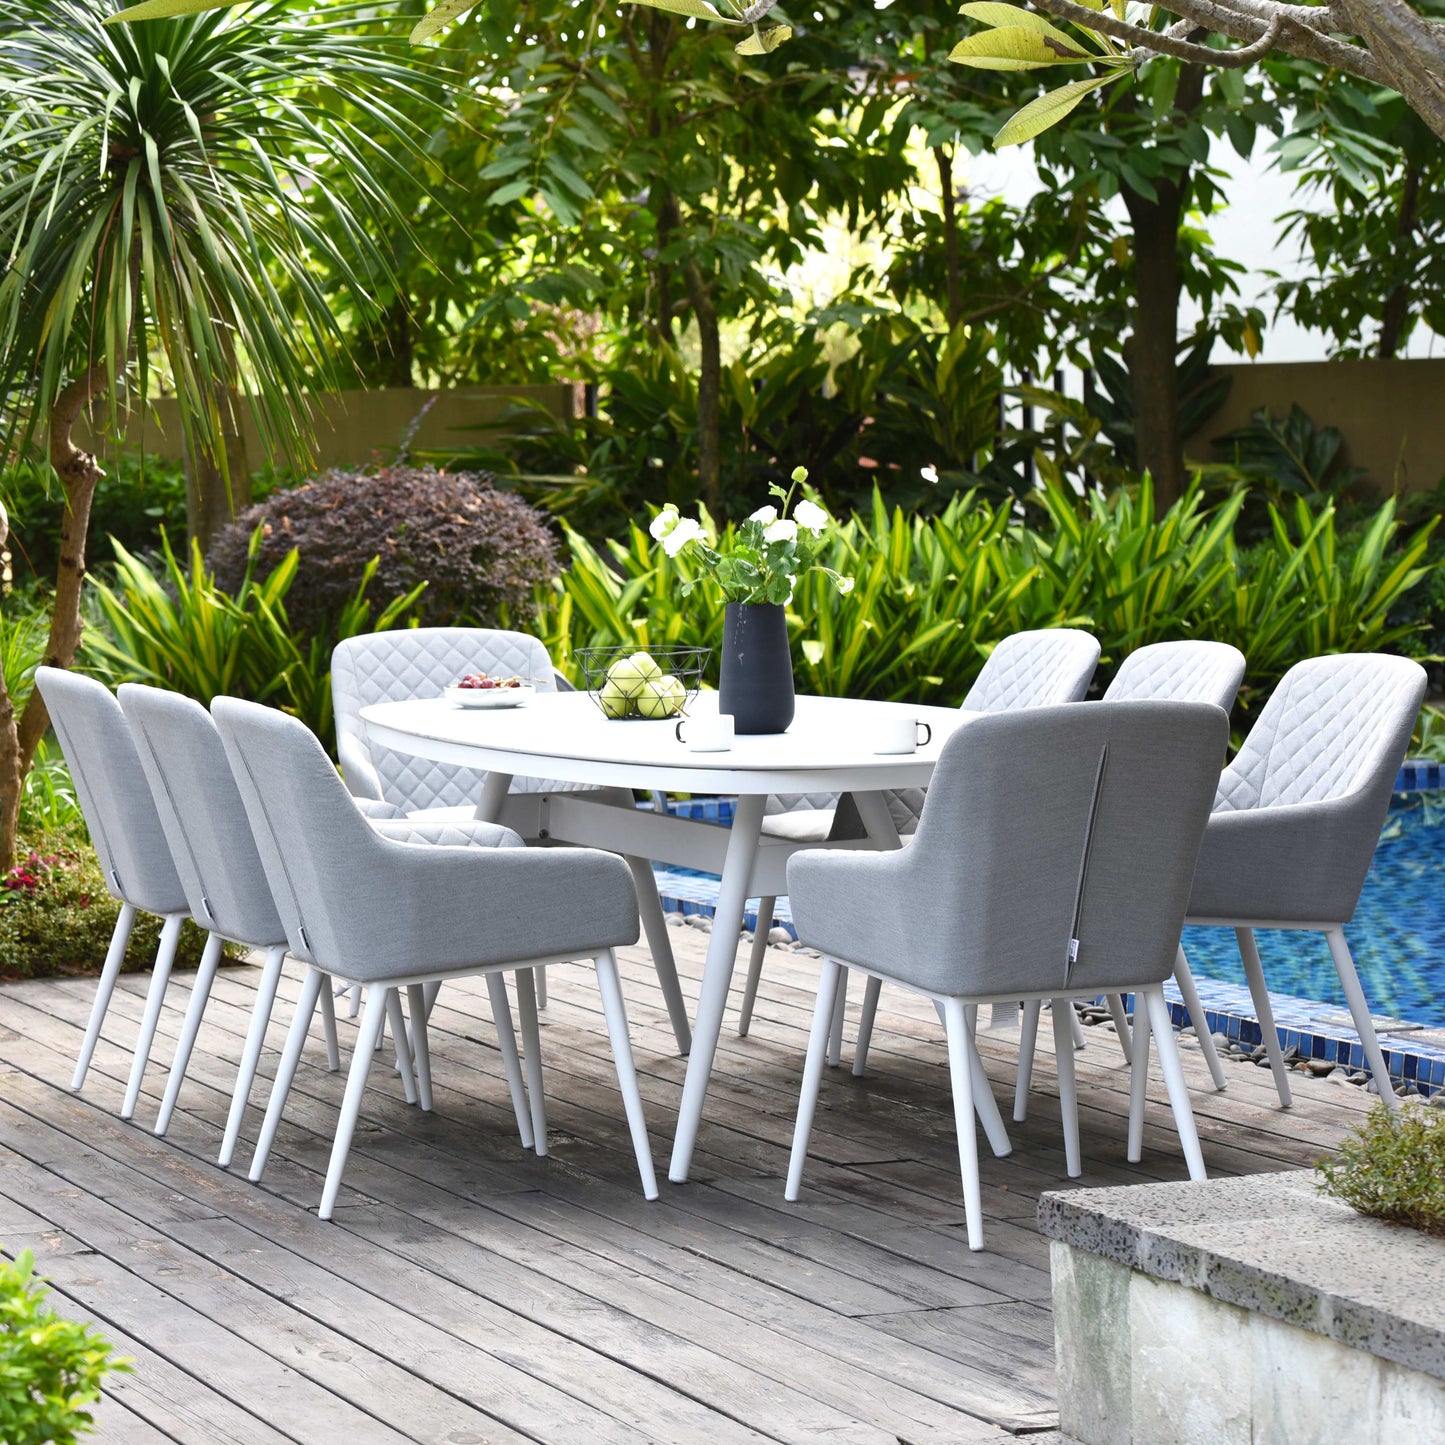 Outdoor Fabric Zest 8 Seat Oval Dining Set